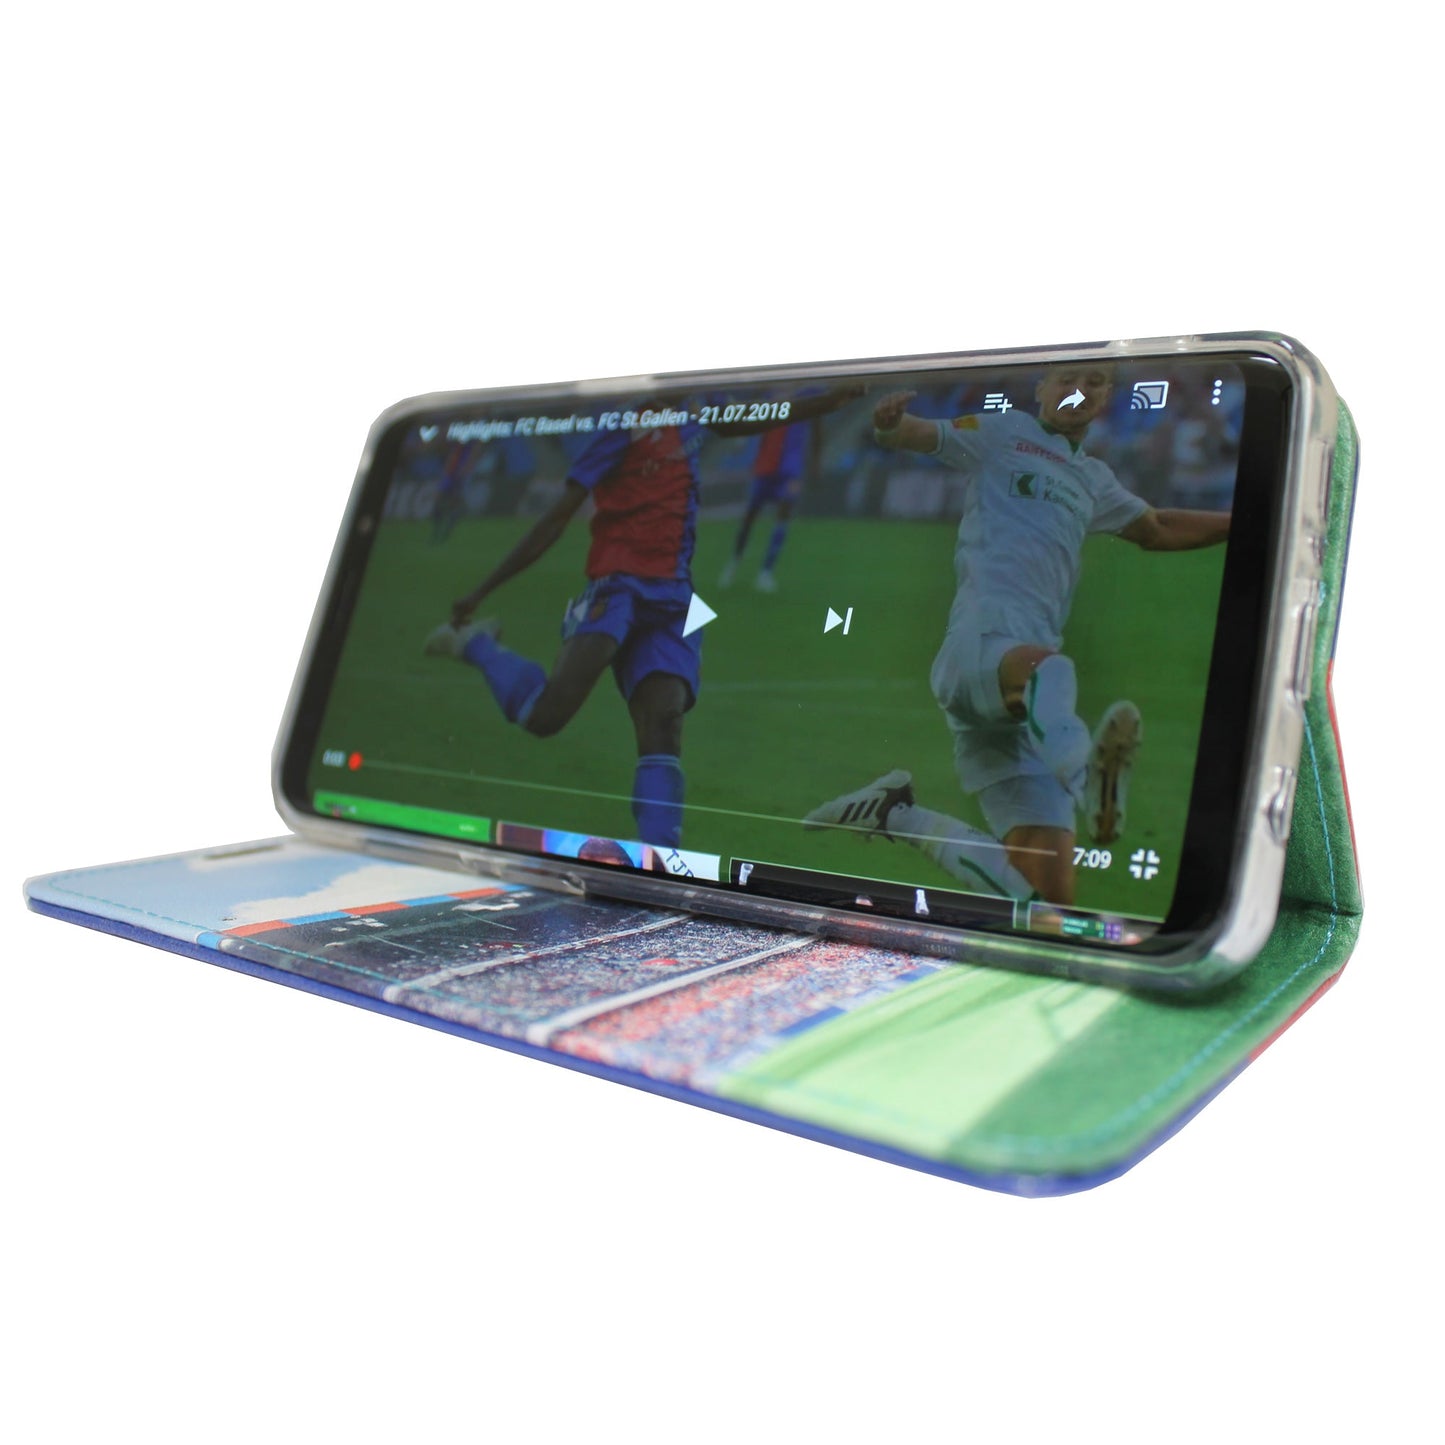 Coque Victor FCB Rouge / Bleue pour Samsung Galaxy S20 Ultra